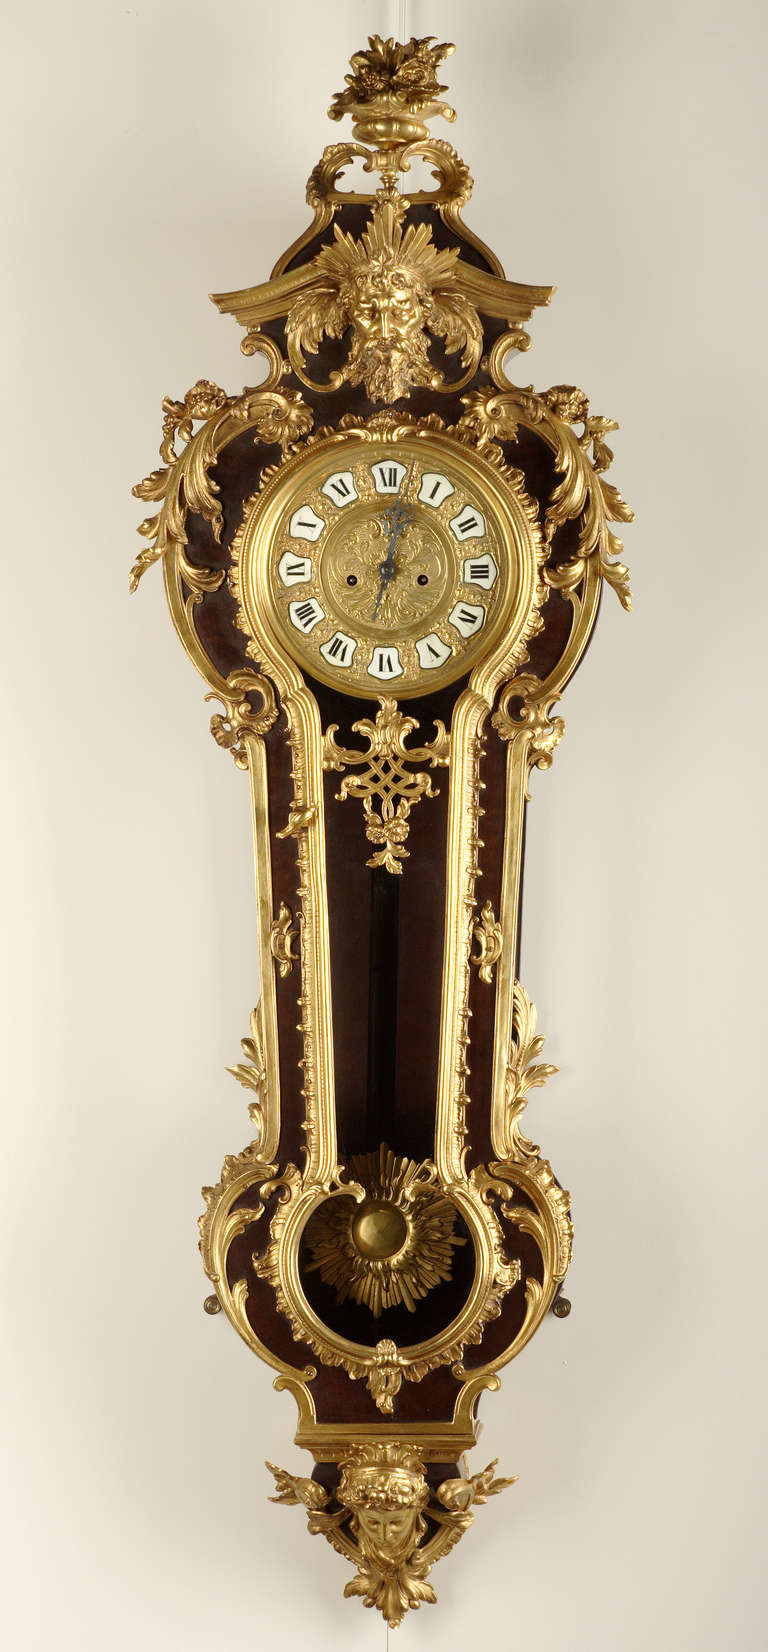 A French Regence style wall clock

Dial signed M*** Taccard & King Hervelry Co., St. Louis

St. Louis (Mo), USA
Circa 1880
Height : 122 cm (48 in.) ; Width : 40 cm (15 3/4 in.) ; Depth : 13 cm (5 in.)

Executed in Mahogany, with a foliate